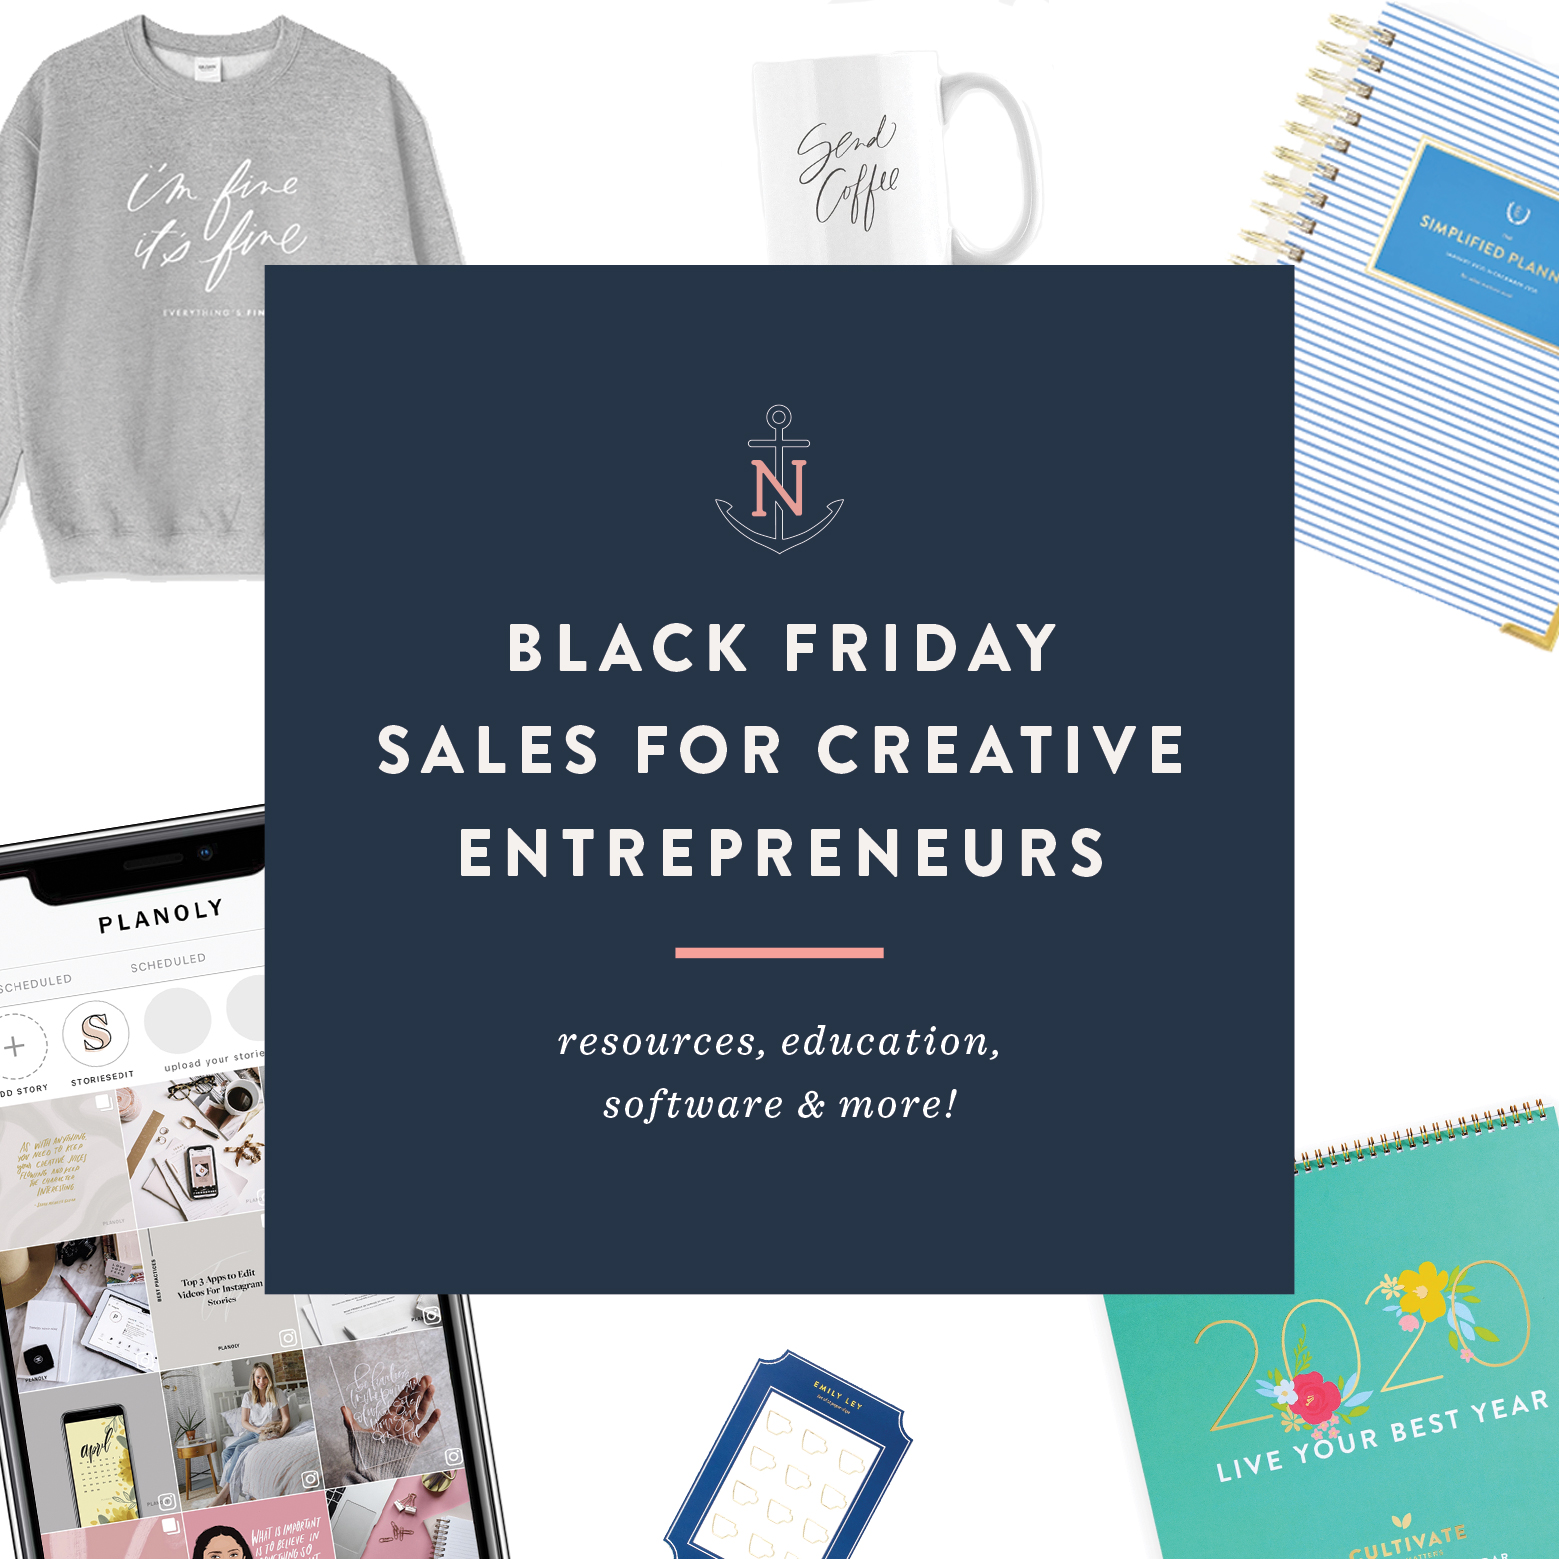 Holiday discounts for creative entrepreneurs on business tools, online courses, conferences, and resources